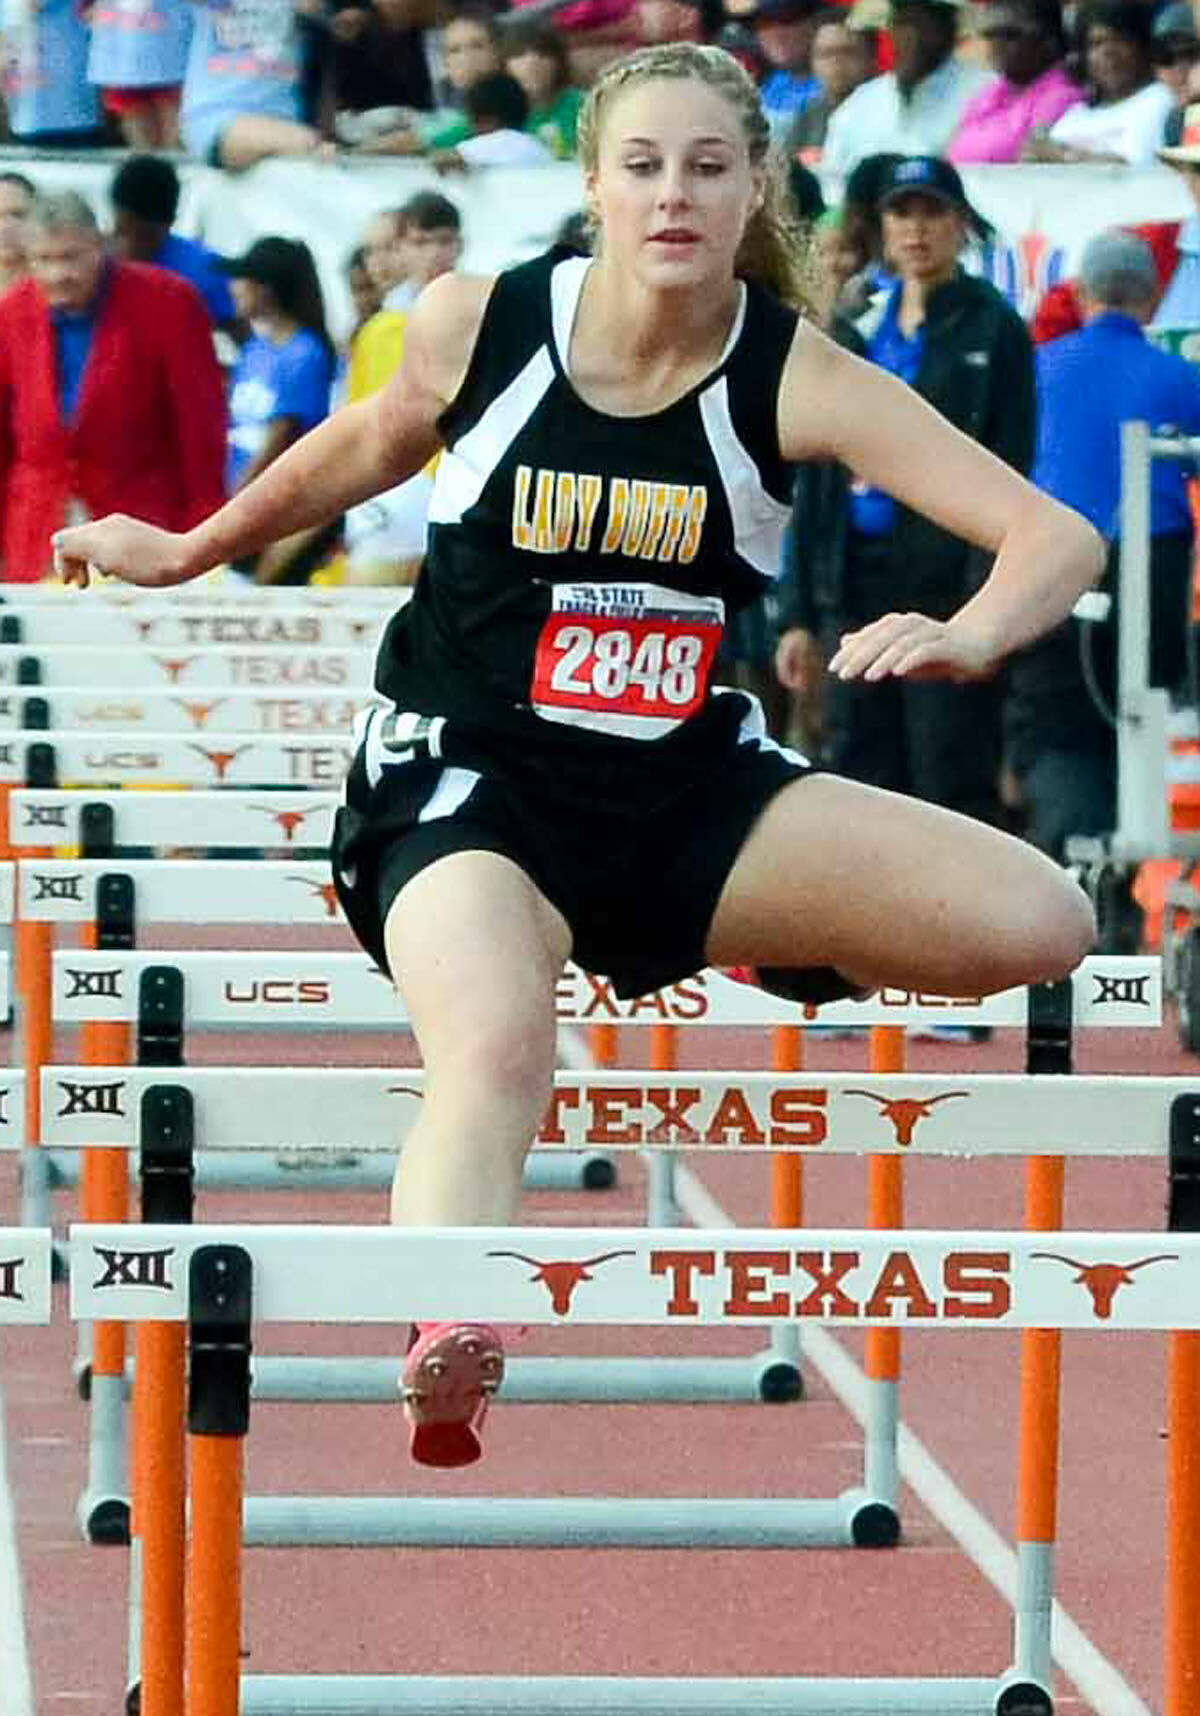 Petersburg freshman Morgan Byrd goes over a hurdle during the Class 1A 100-meter race at the UIL State Track and Field Championships in Austin Saturday.